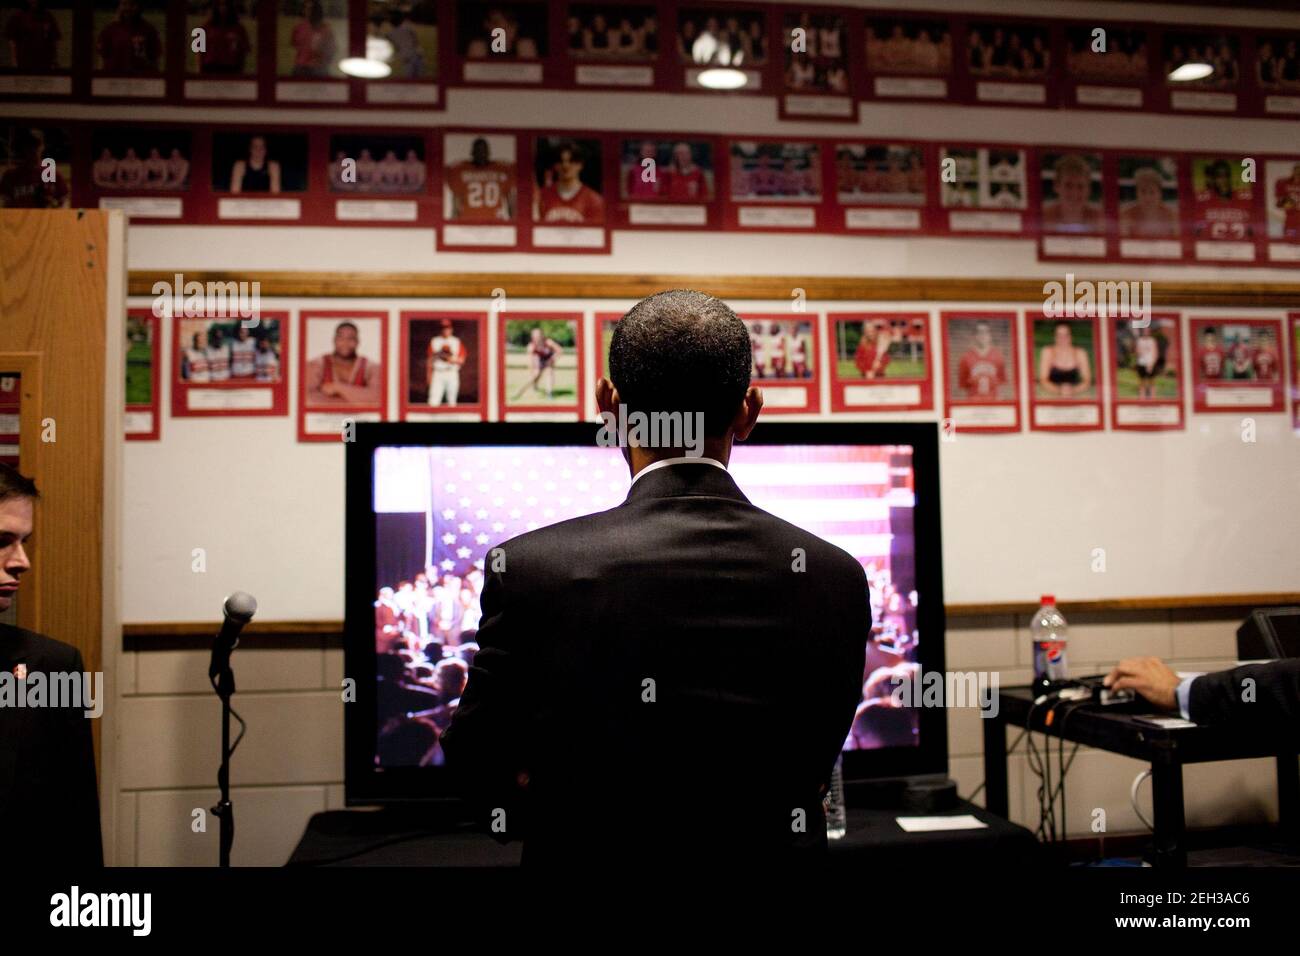 President Barack Obama waits backstage to be introduced at a health care town hall meeting at Shaker Heights High School in Cleveland, Ohio on July 23, 2009. Stock Photo